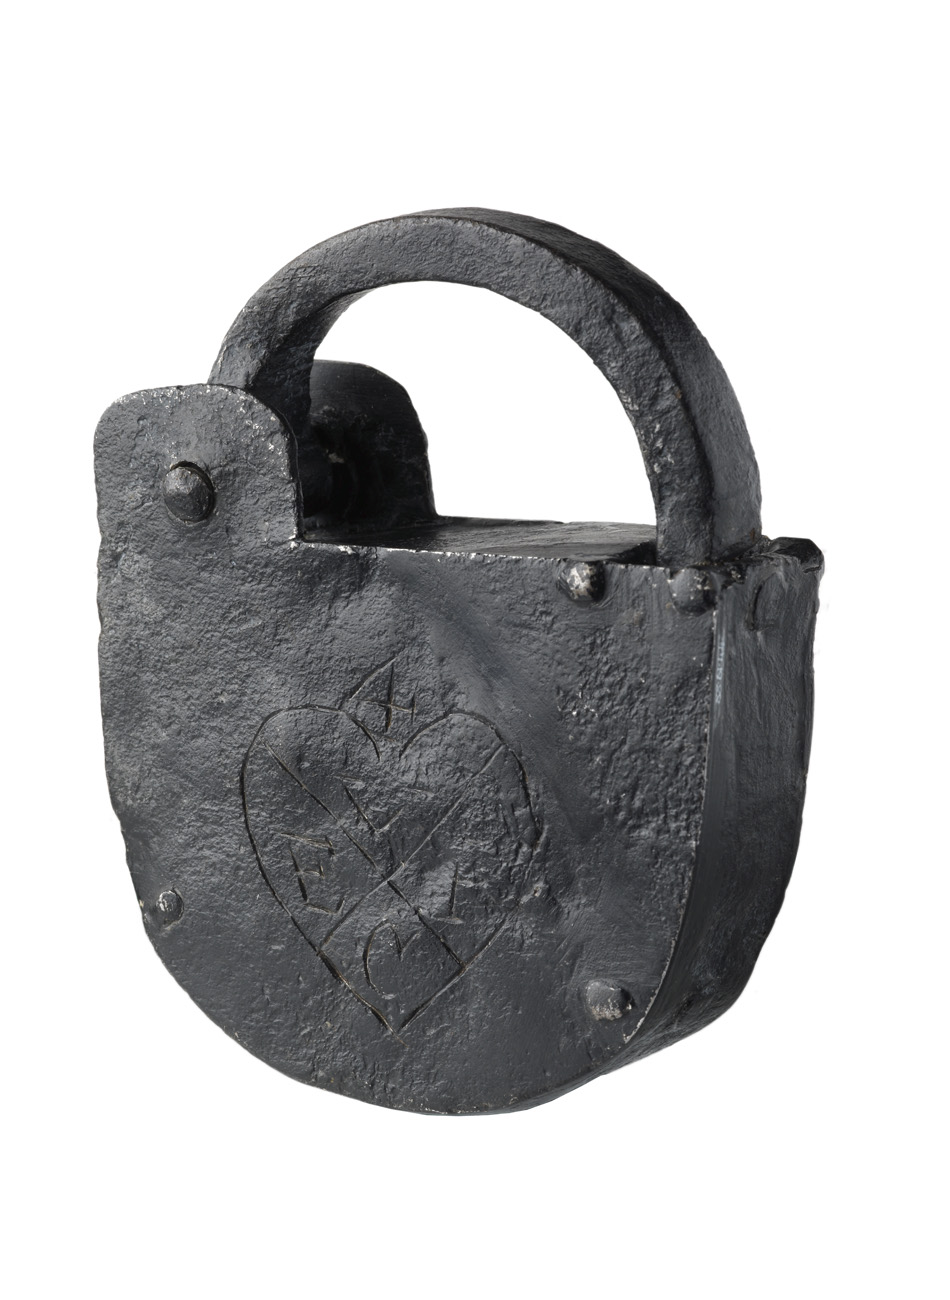 Padlock used to secure warehouses on the Thames waterside, 1700s.